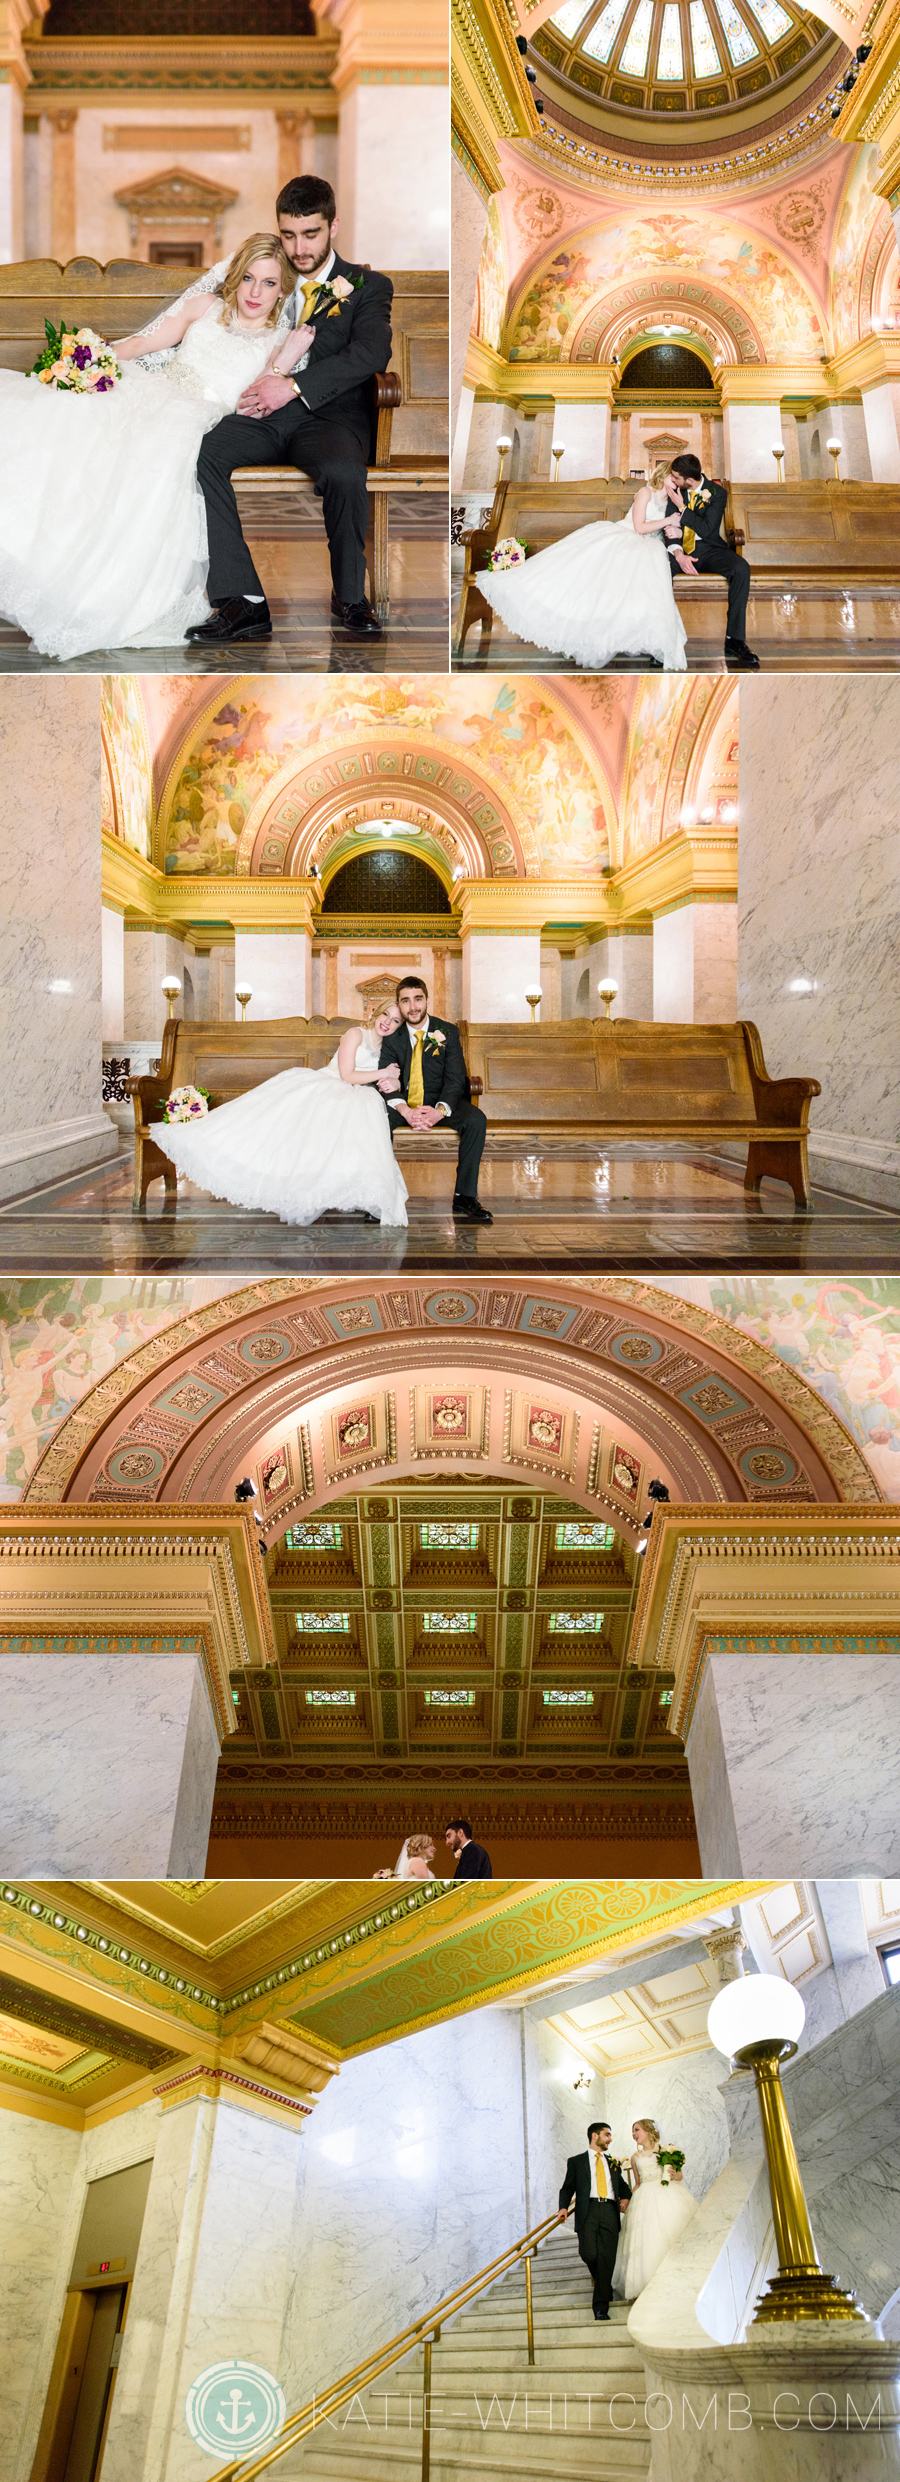 Bride & Groom portraits around Allen County Courthouse after their wedding ceremony